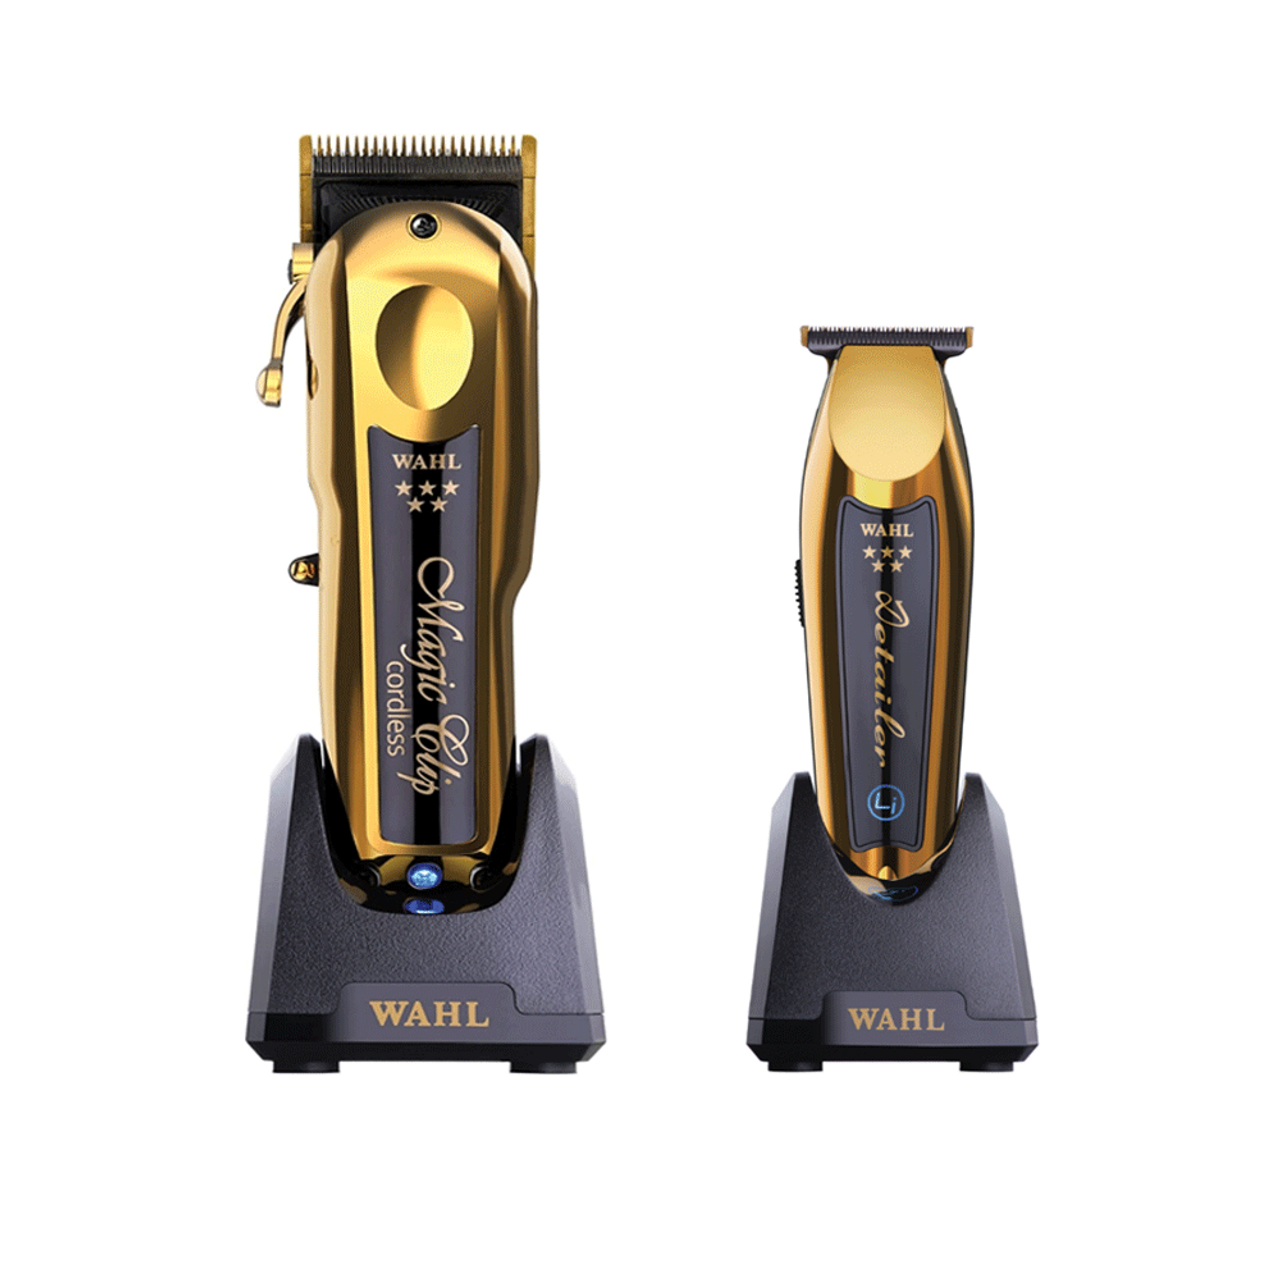 Wahl Professional Star Magic Clip Precision Fade Clipper with Zero-Gap Blades for Professional Barbers and Stylists並行輸入